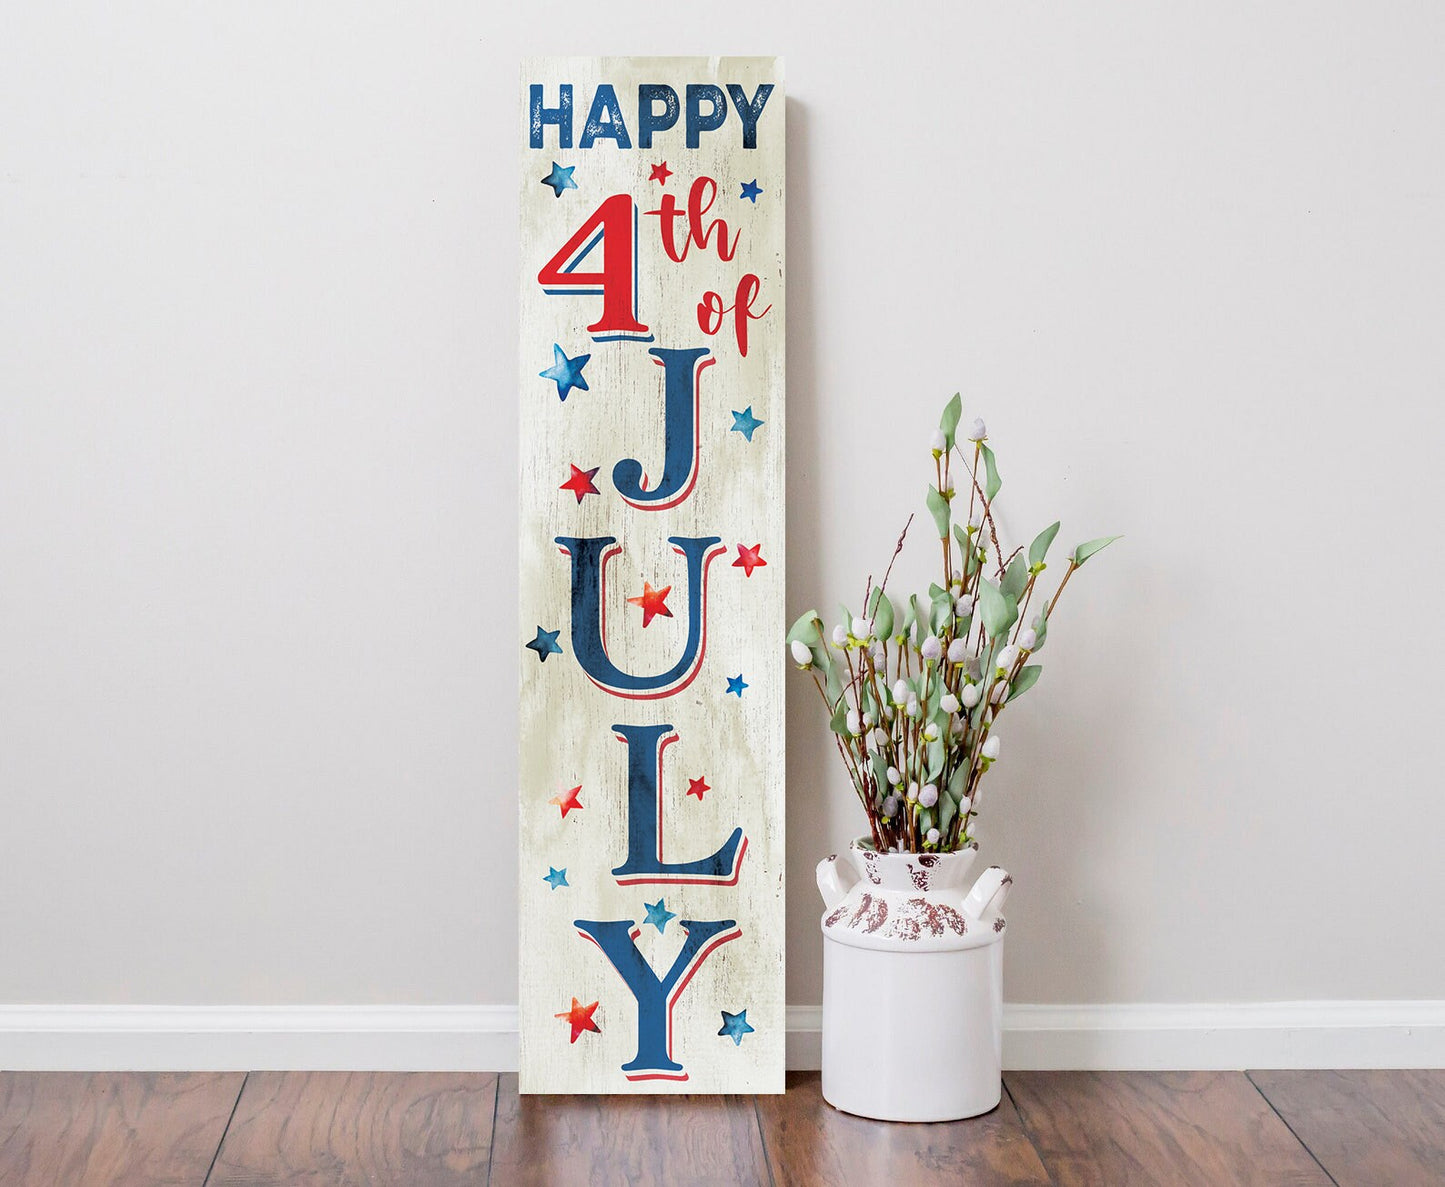 36in "HAPPY 4TH OF JULY" Porch Sign - Perfect for Front Porch Home Decor